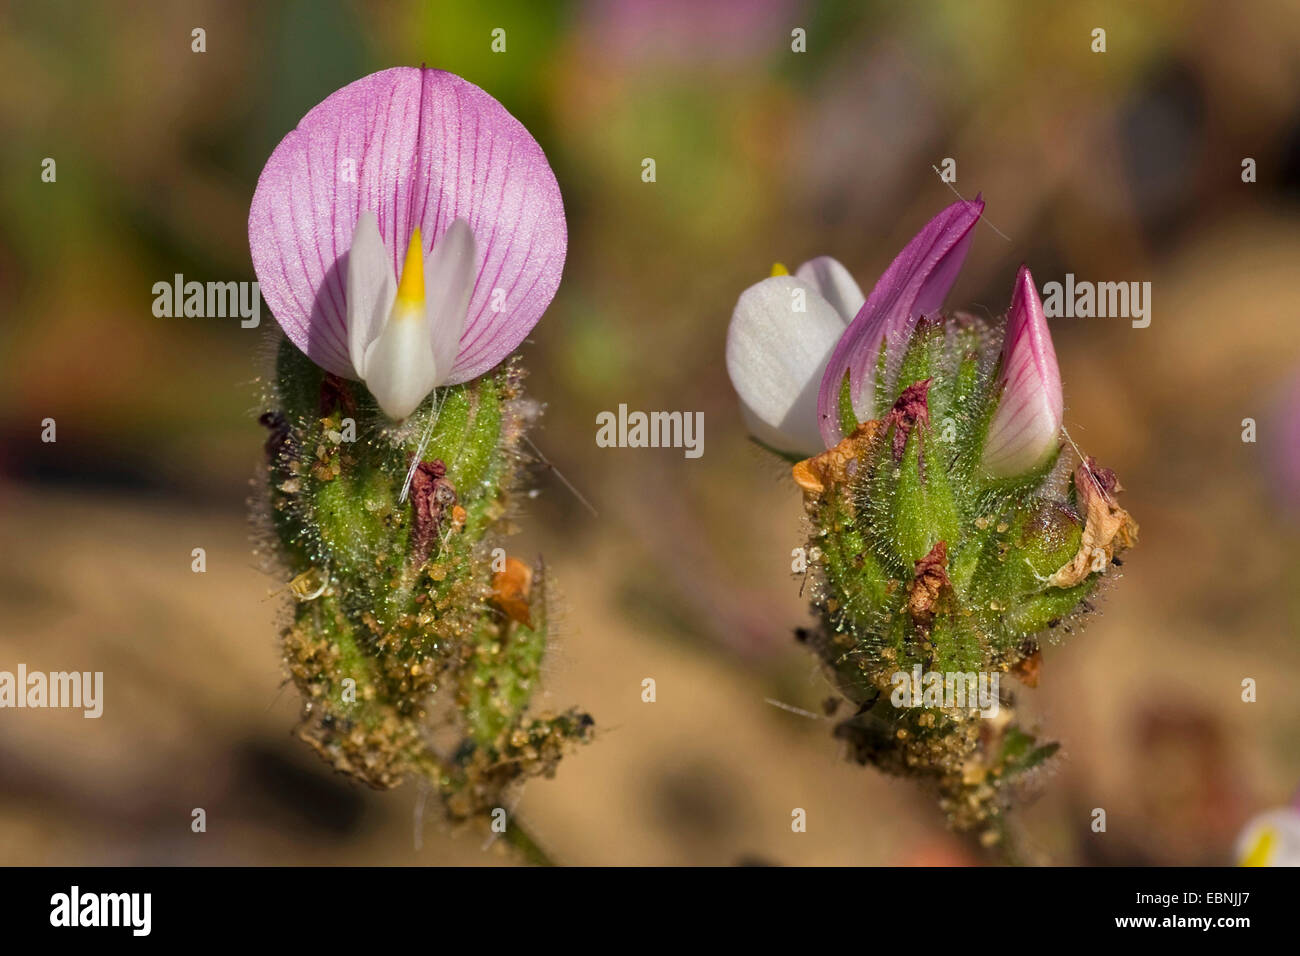 Rest Harrow (Ononis cossoniana), blooming, Portugal Stock Photo